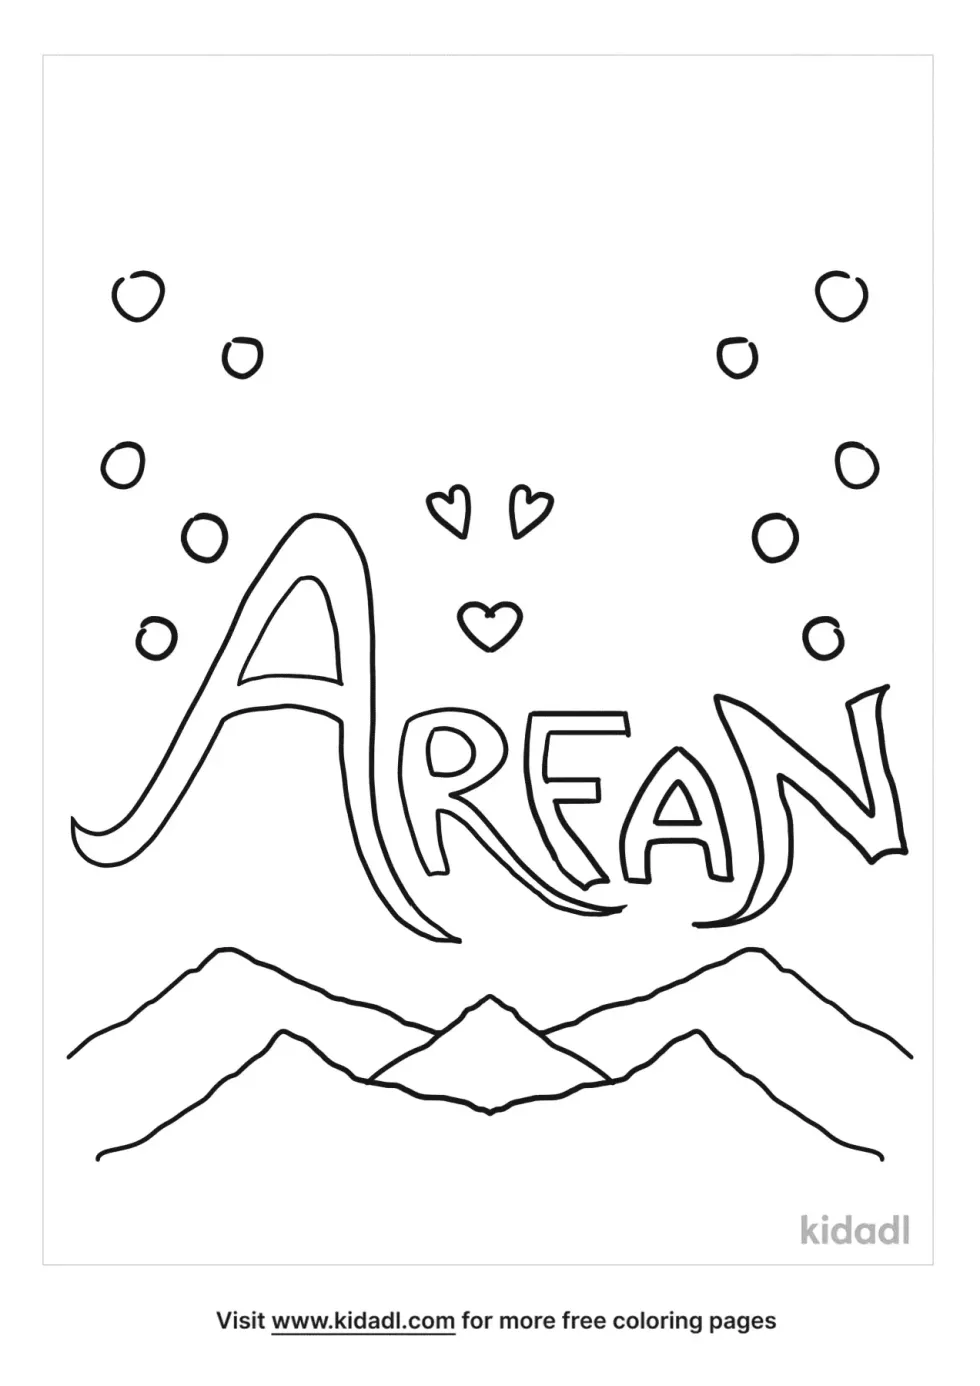 Arfan Name Coloring Page